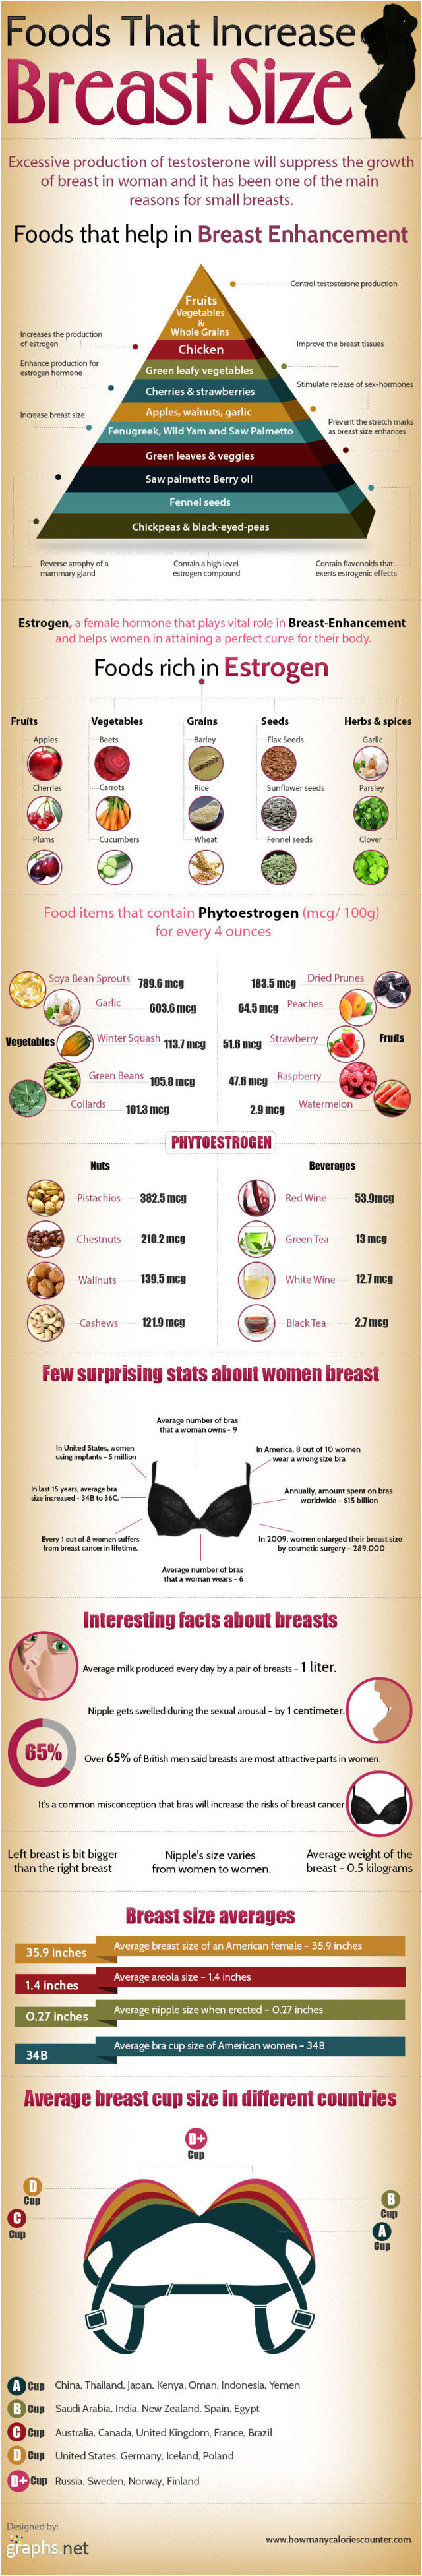 Increase Breast Size 90